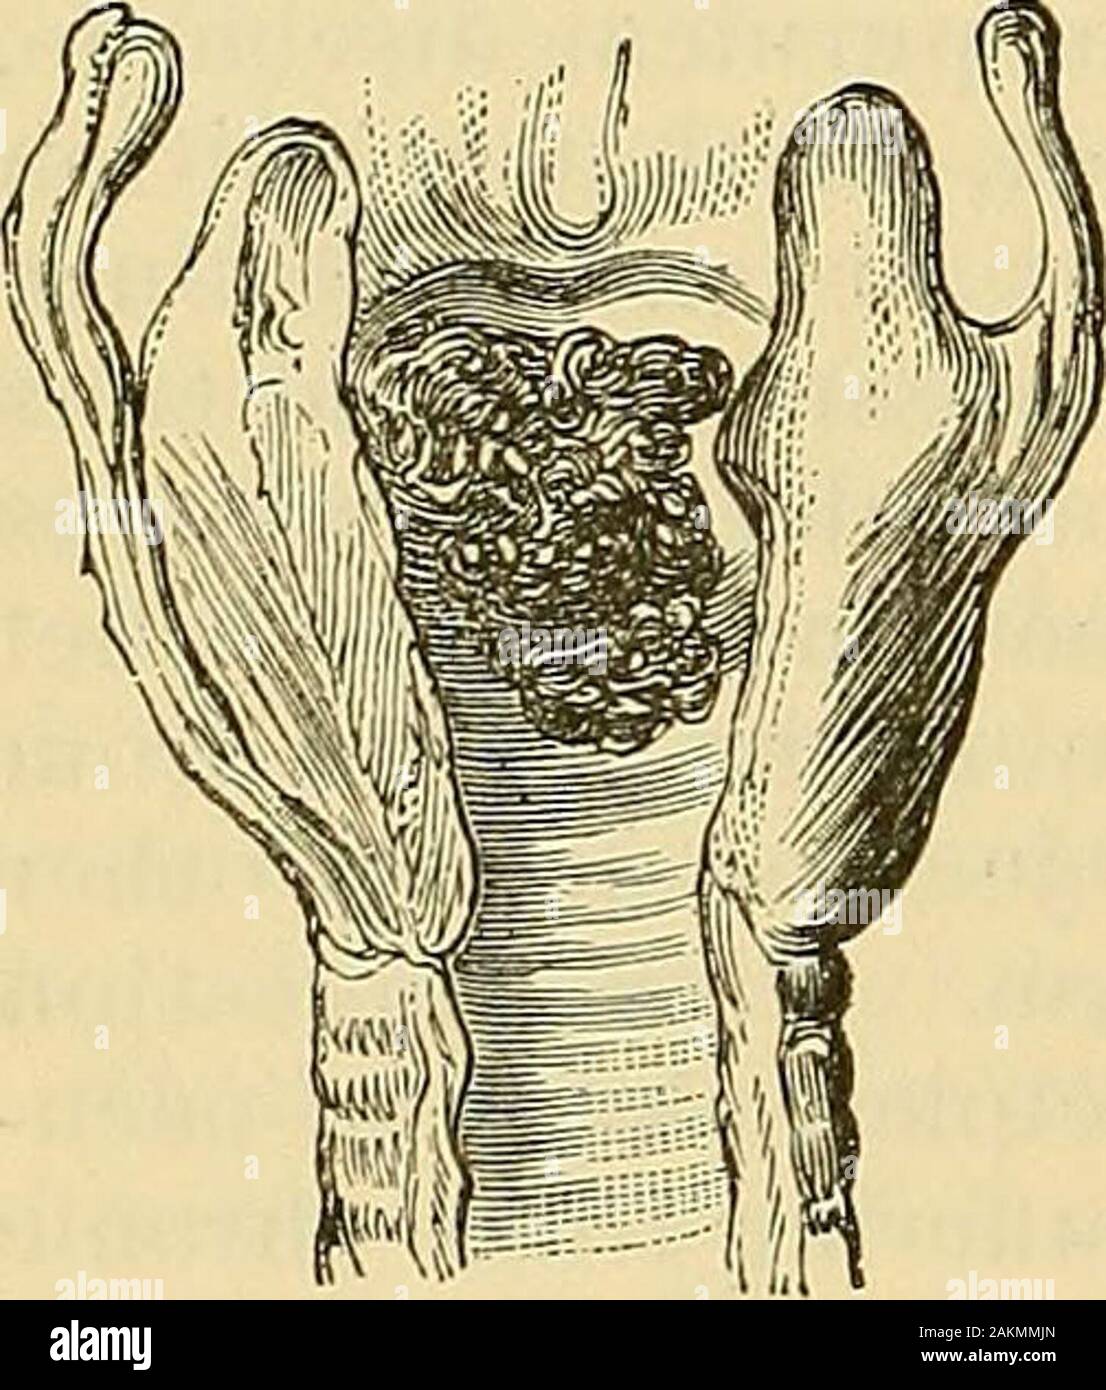 The science and art of surgery : being a treatise on surgical injuries, diseases, and operations . rouillou of Paris, and other conti-nental Surgeons. Gibb, in cases of this kind, sncceeded in passing aloop of silver wire round the bases of two such growths, lying justwithin the true vocal cords, and then detaching them by drawing thewires through a steel cannula, and so tightening the loop. This inge-nious operation has been performed several times with the aid of thelaryngoscope. Thyrotomy has been performed in some cases. Thisoperation consists in opening the trachea and introducing a trach Stock Photo